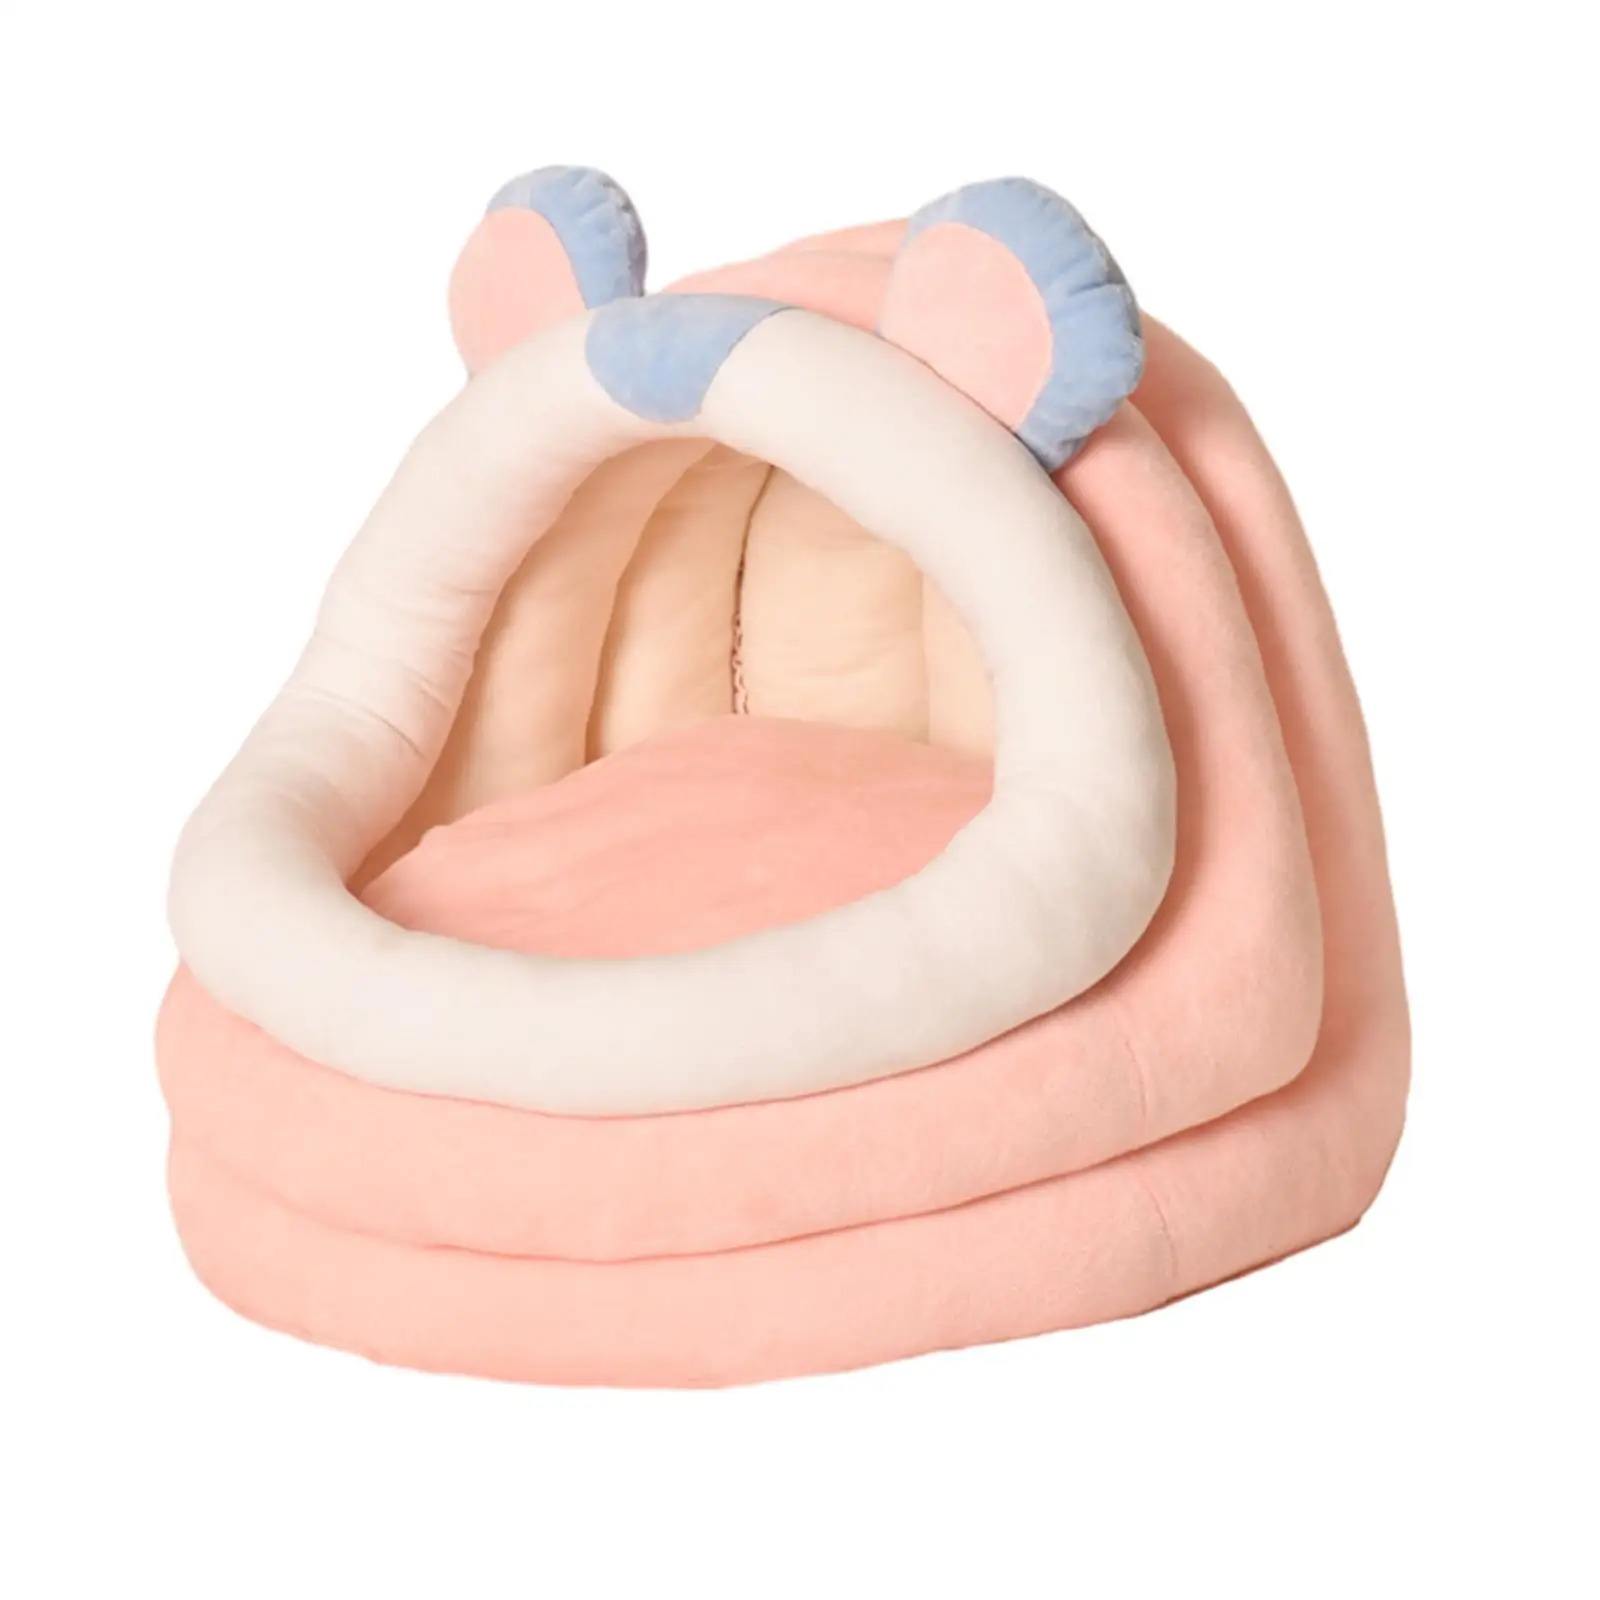 Cute Cat Bed for Indoor Removable Cushion Cat House for Rabbits Puppy